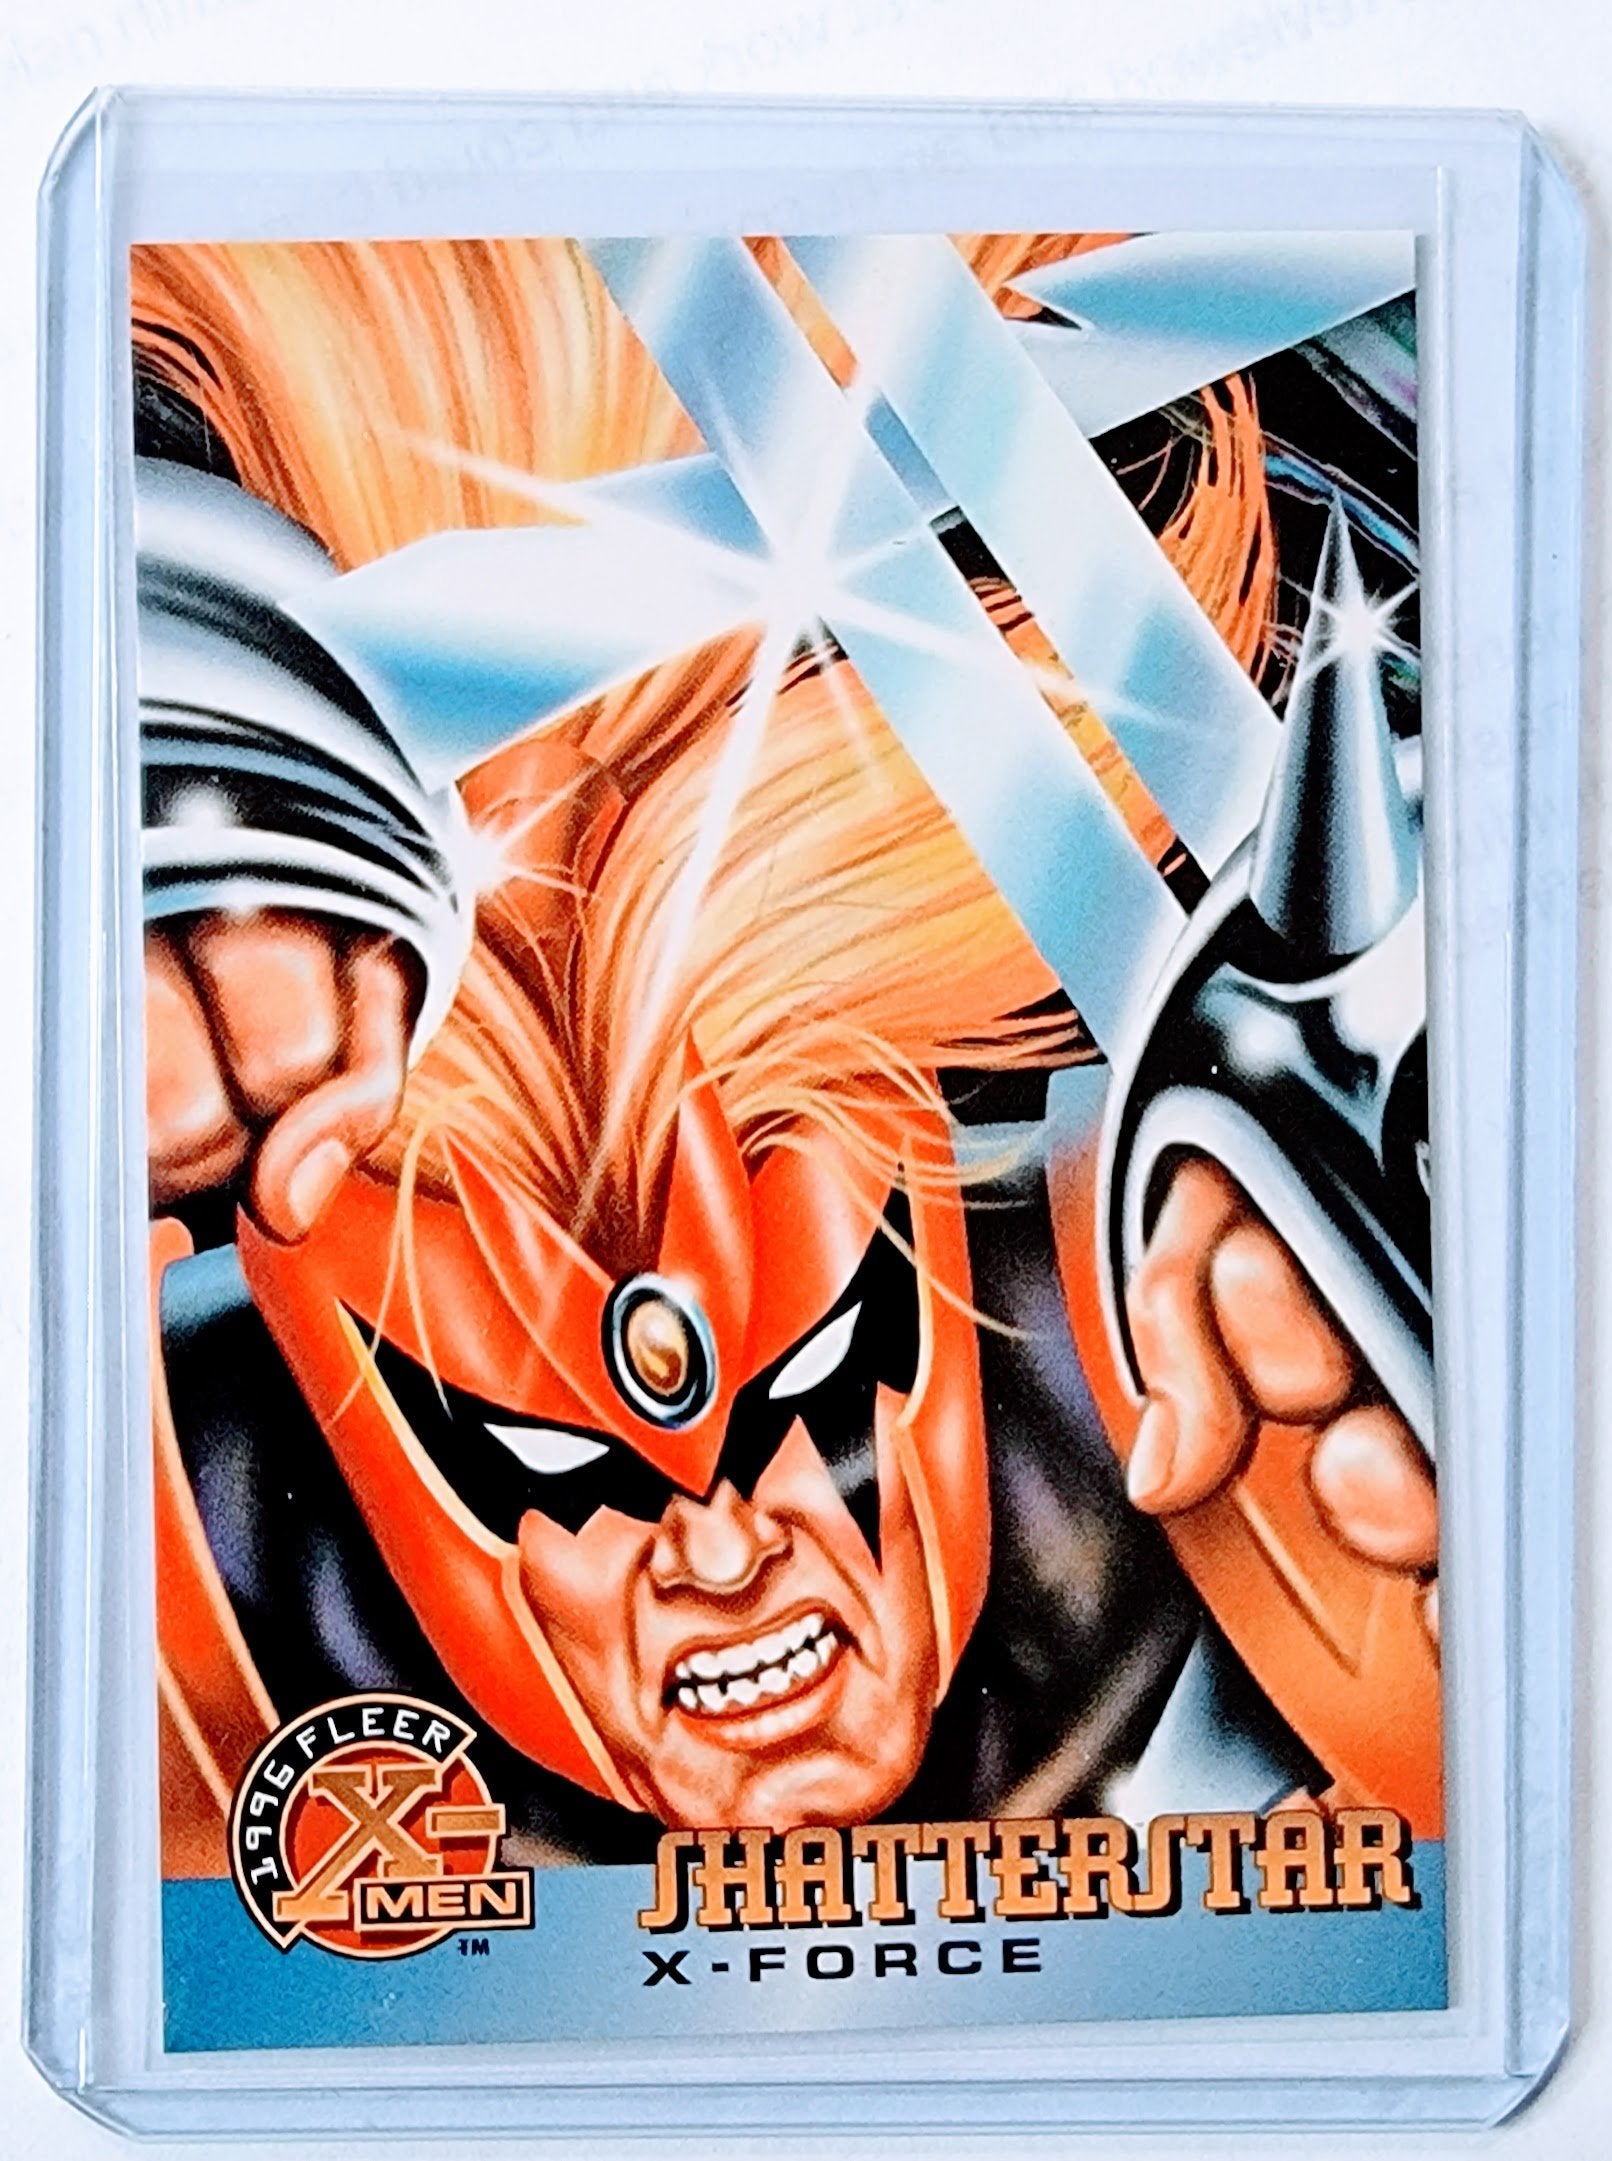 1996 Fleer X-Men Shatterstar X-Force Marvel Trading Card GRB1 simple Xclusive Collectibles   